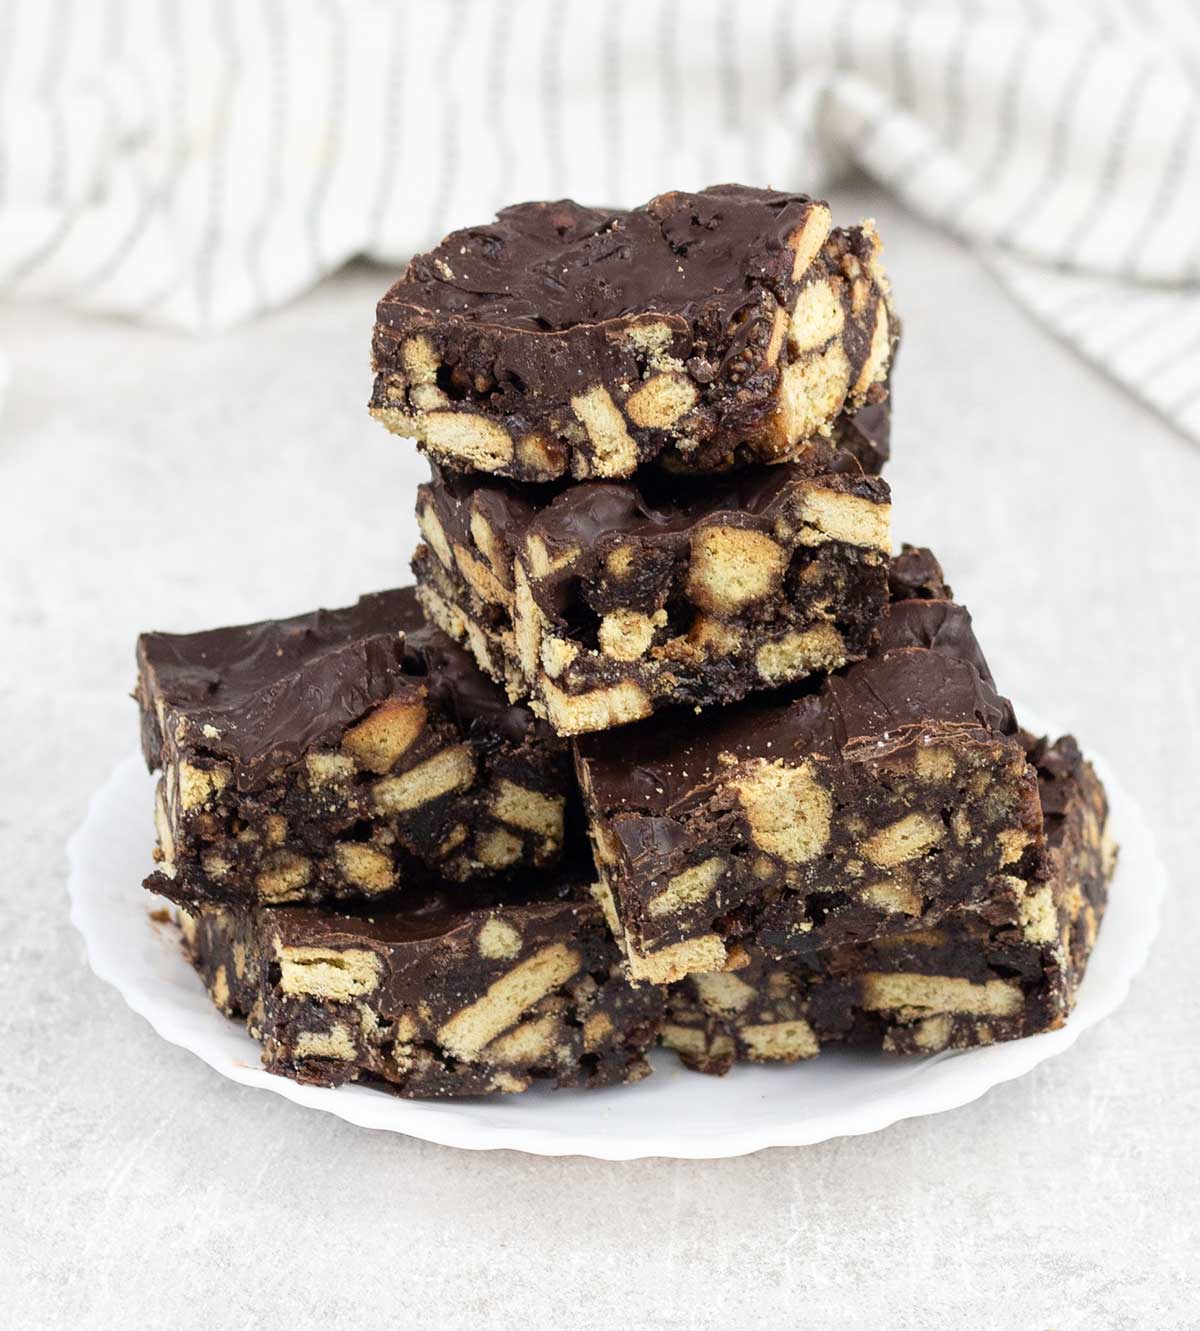 Chocolate Tiffin squares in a plate